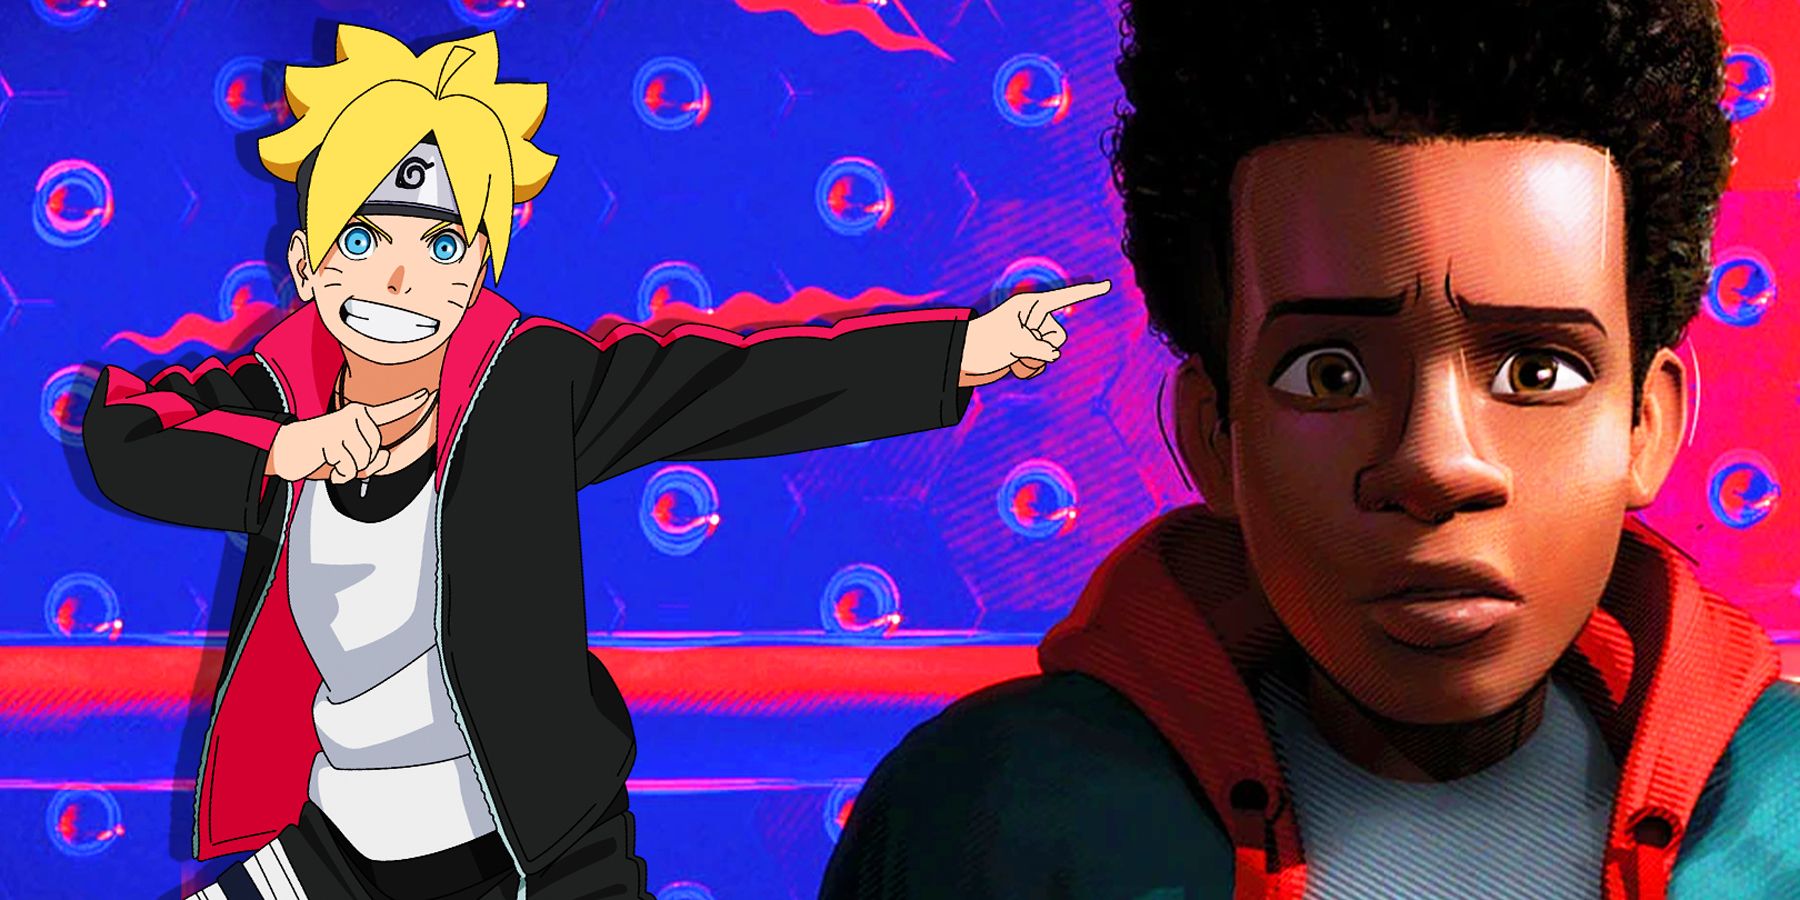 Boruto from anime Boruto: Naruto Next Generations and Miles Morales from Spider-Man: Into the Spider-Verse